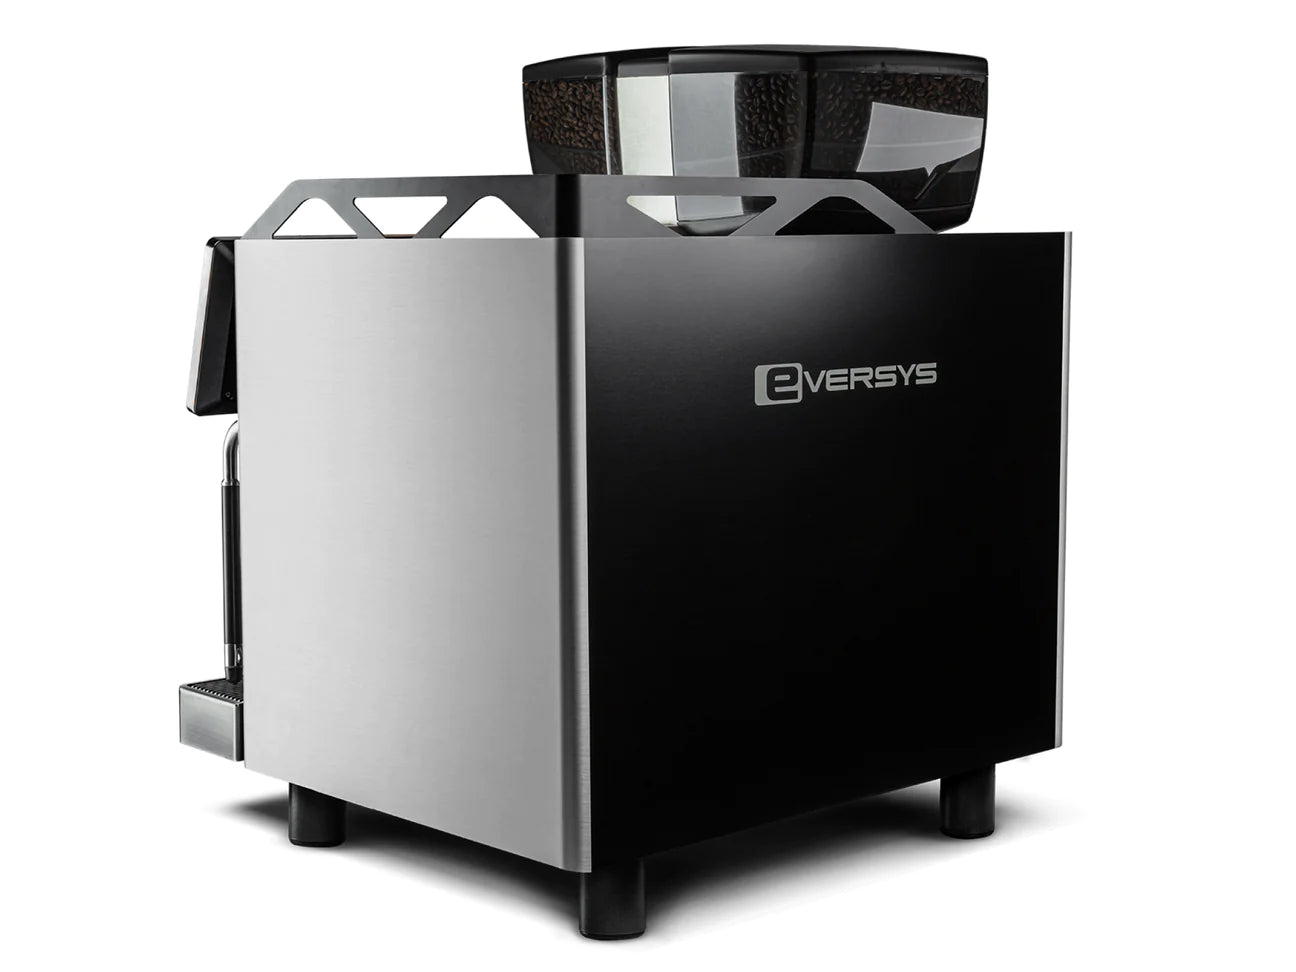 Eversys Enigma E'CUP HEATER